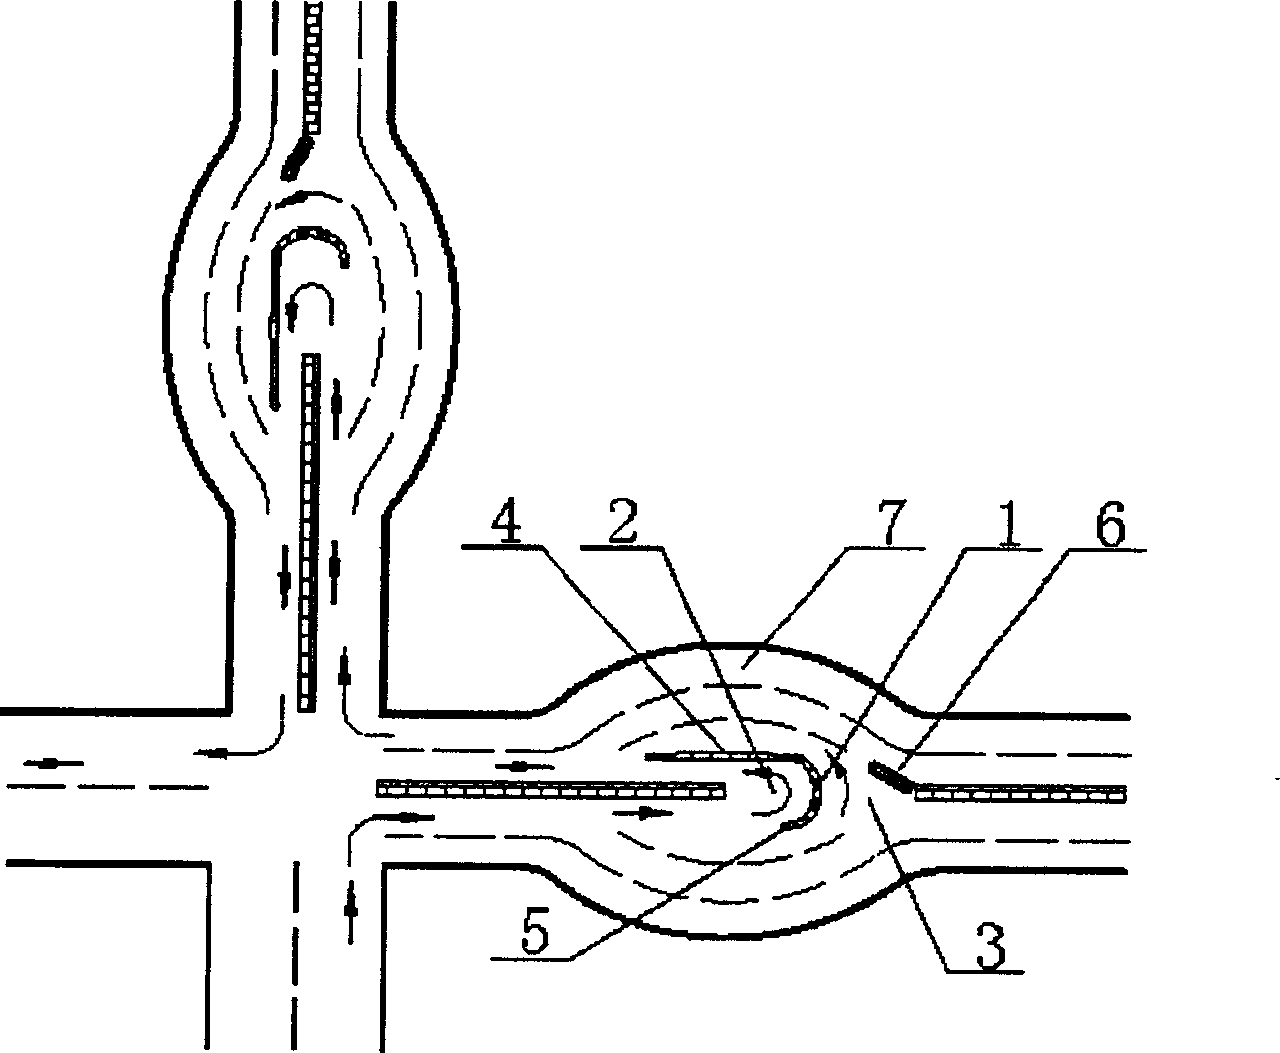 Method for solving motor vehicle turning left at crossroad